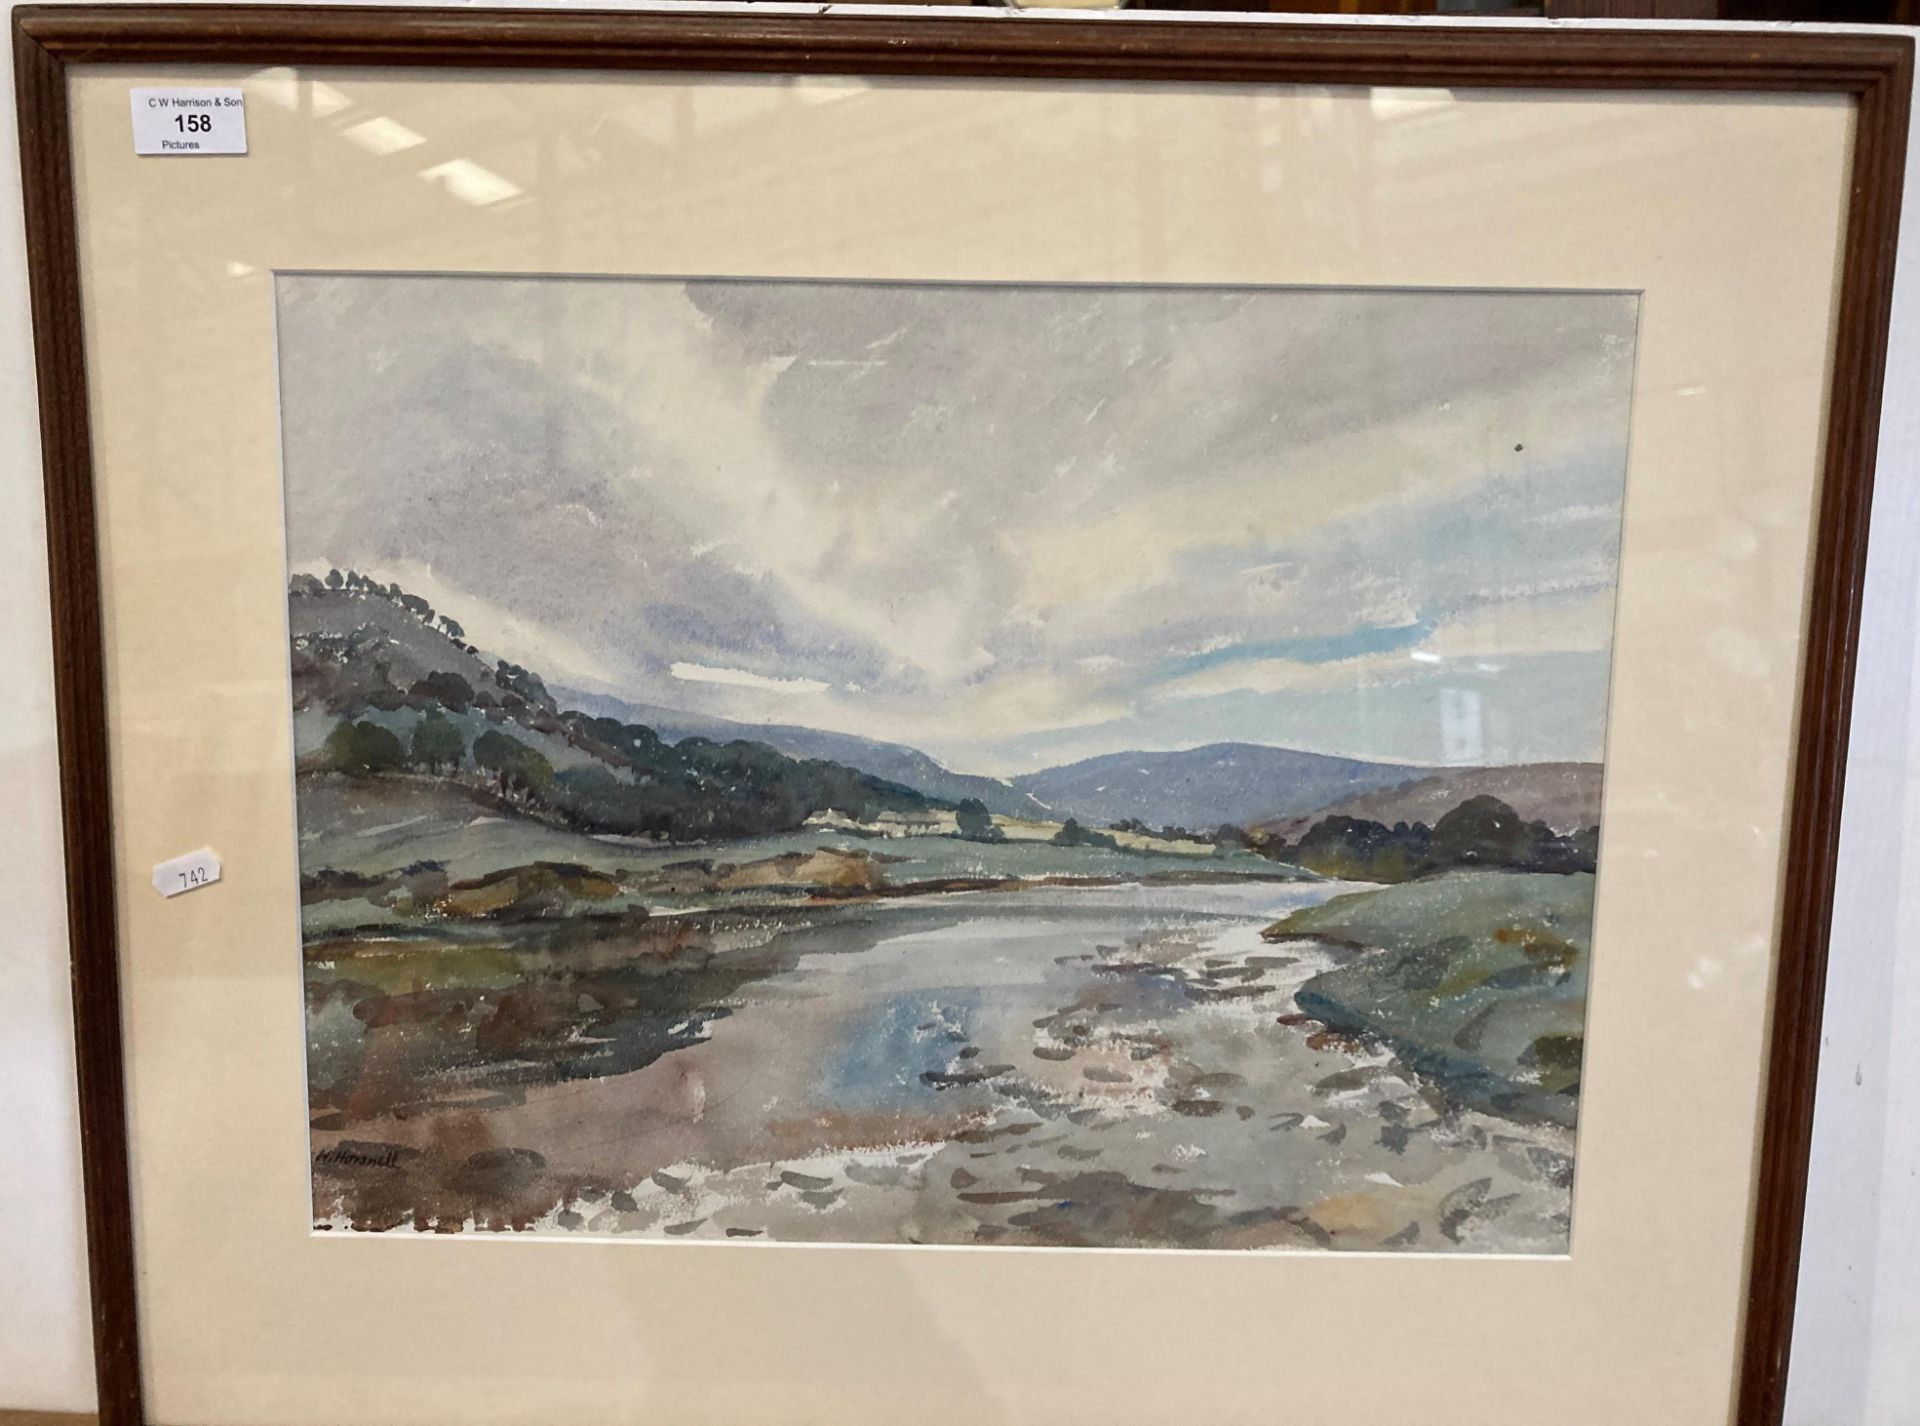 † W Horsnell (1911-1997) framed watercolour 'Thorpe in Wharfdale' 36cm x 47cm with part torn label